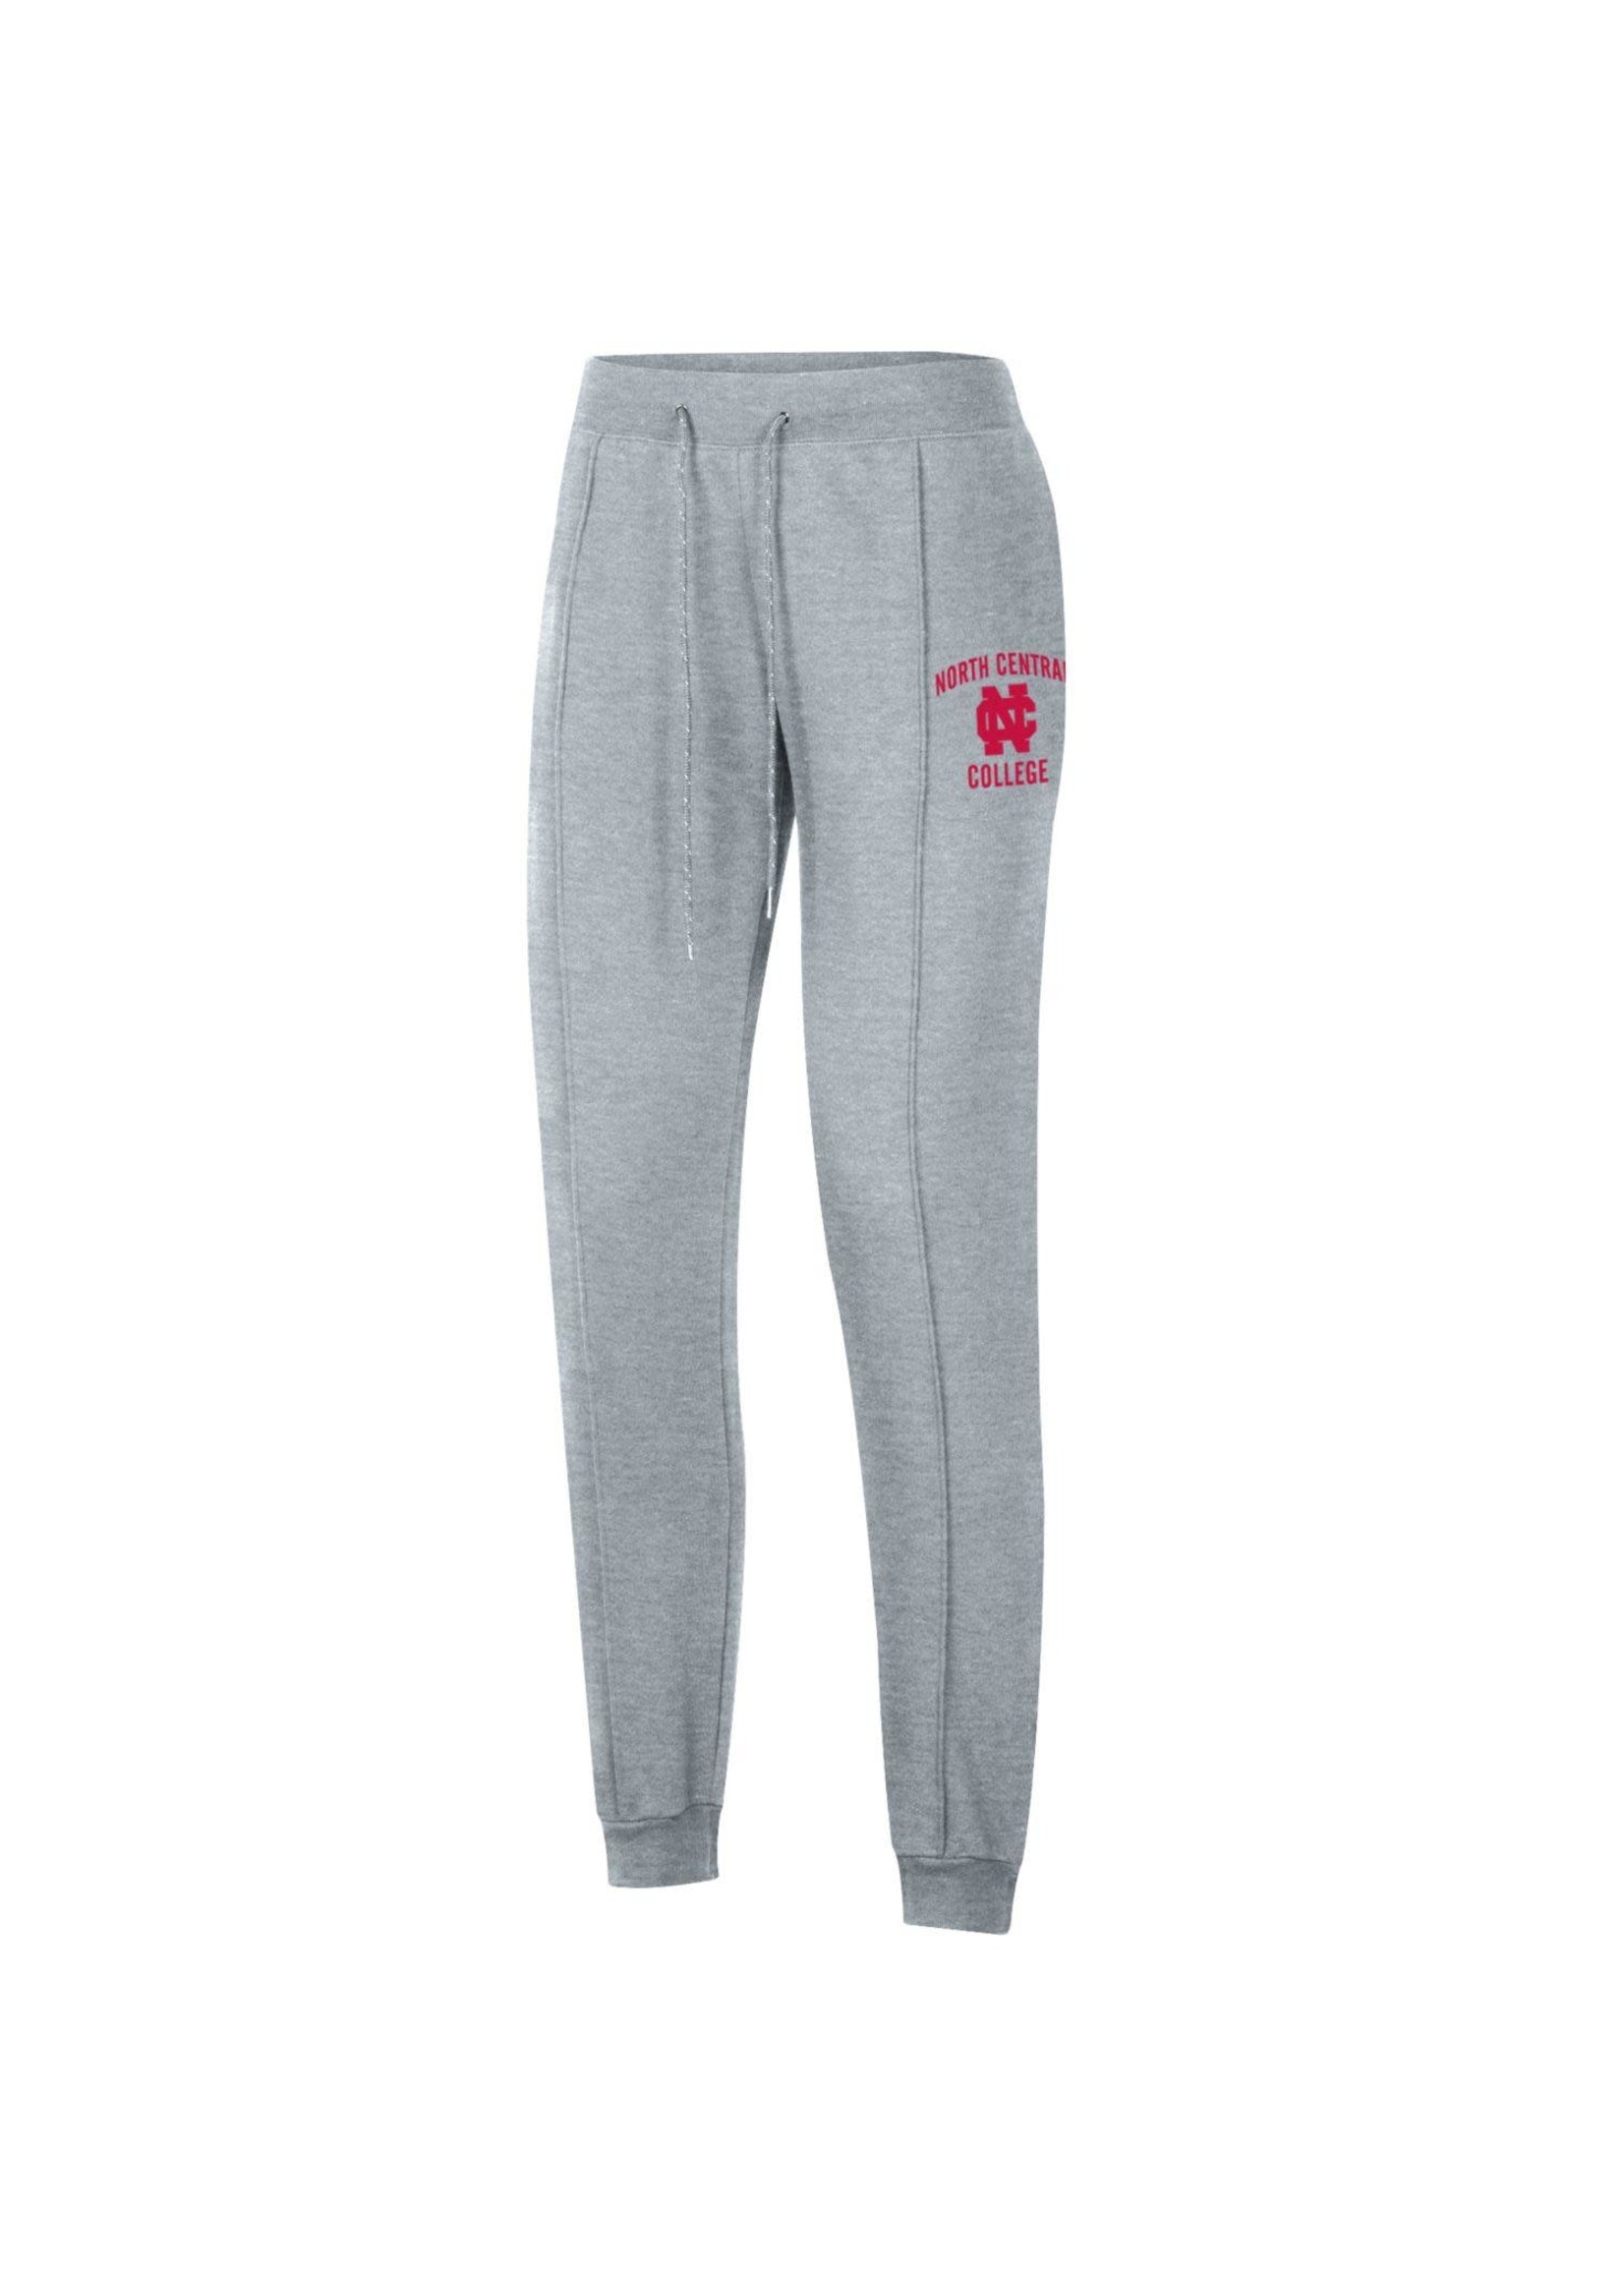 Gear For Sports Women's Relaxed Jogger Pant by Gear For Sports